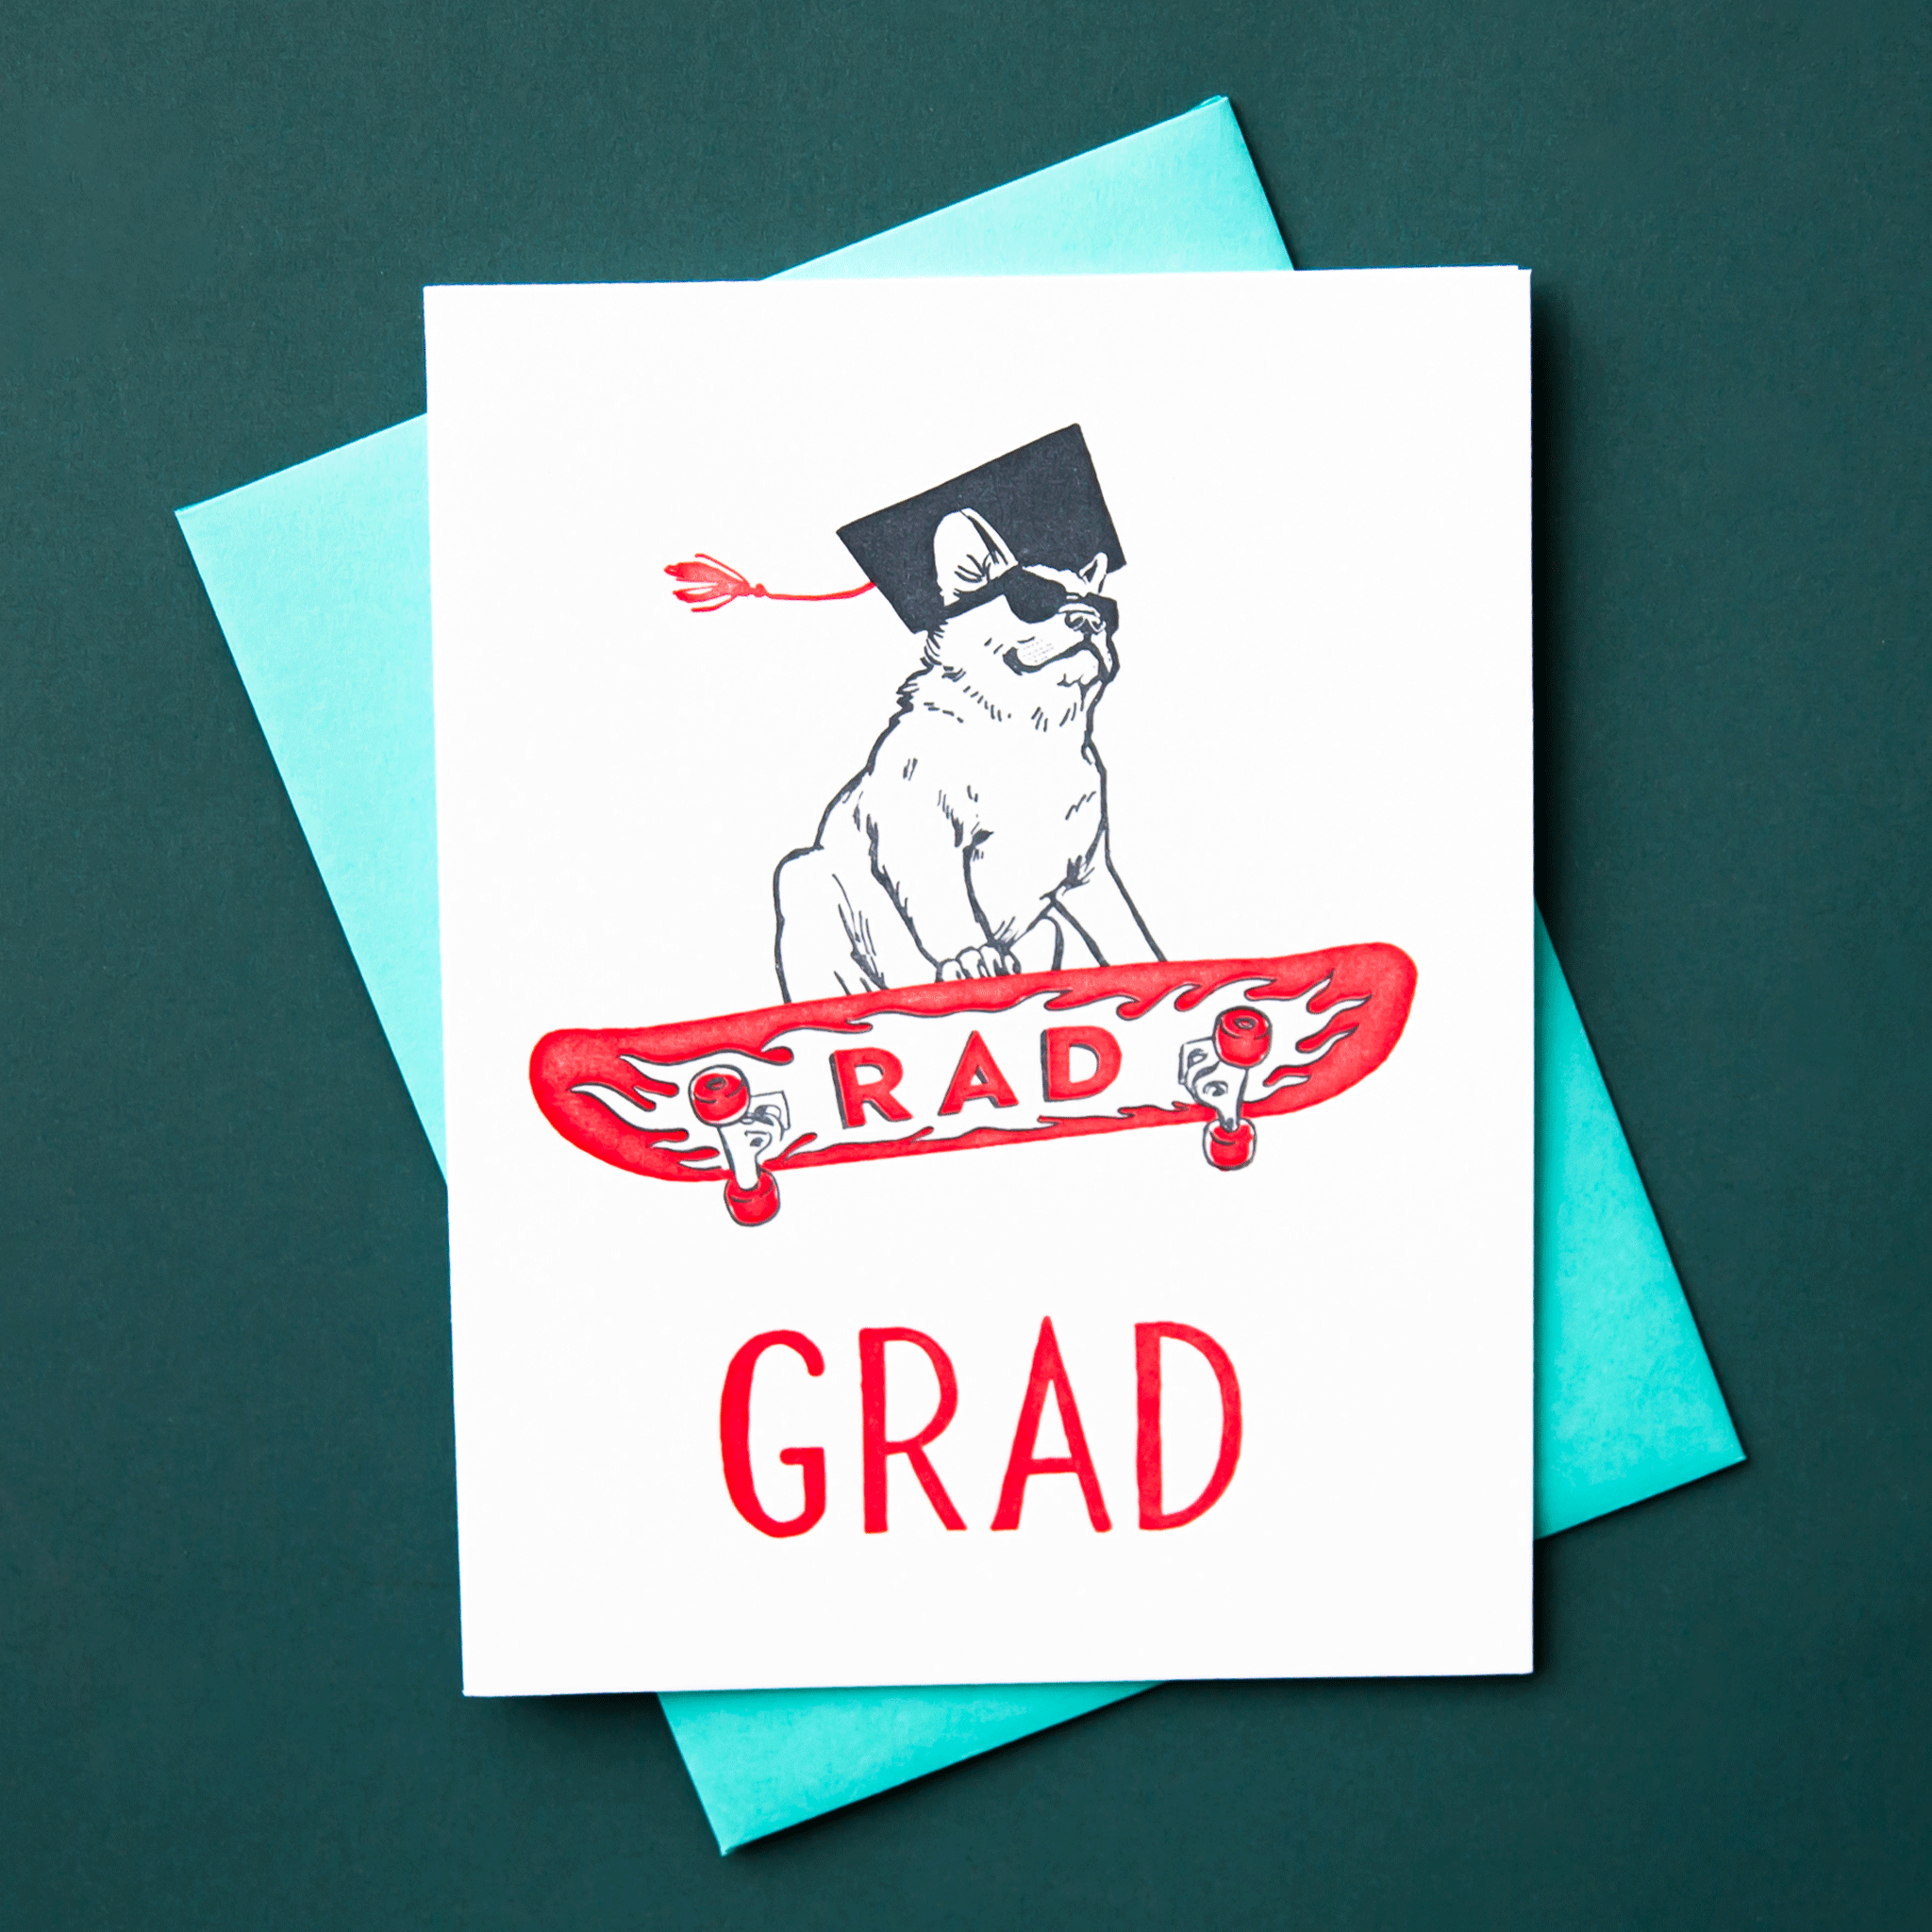 On a teal background is a ivory card with an illustration of a french bulldog on a skateboard that reads, "Rad Grad".